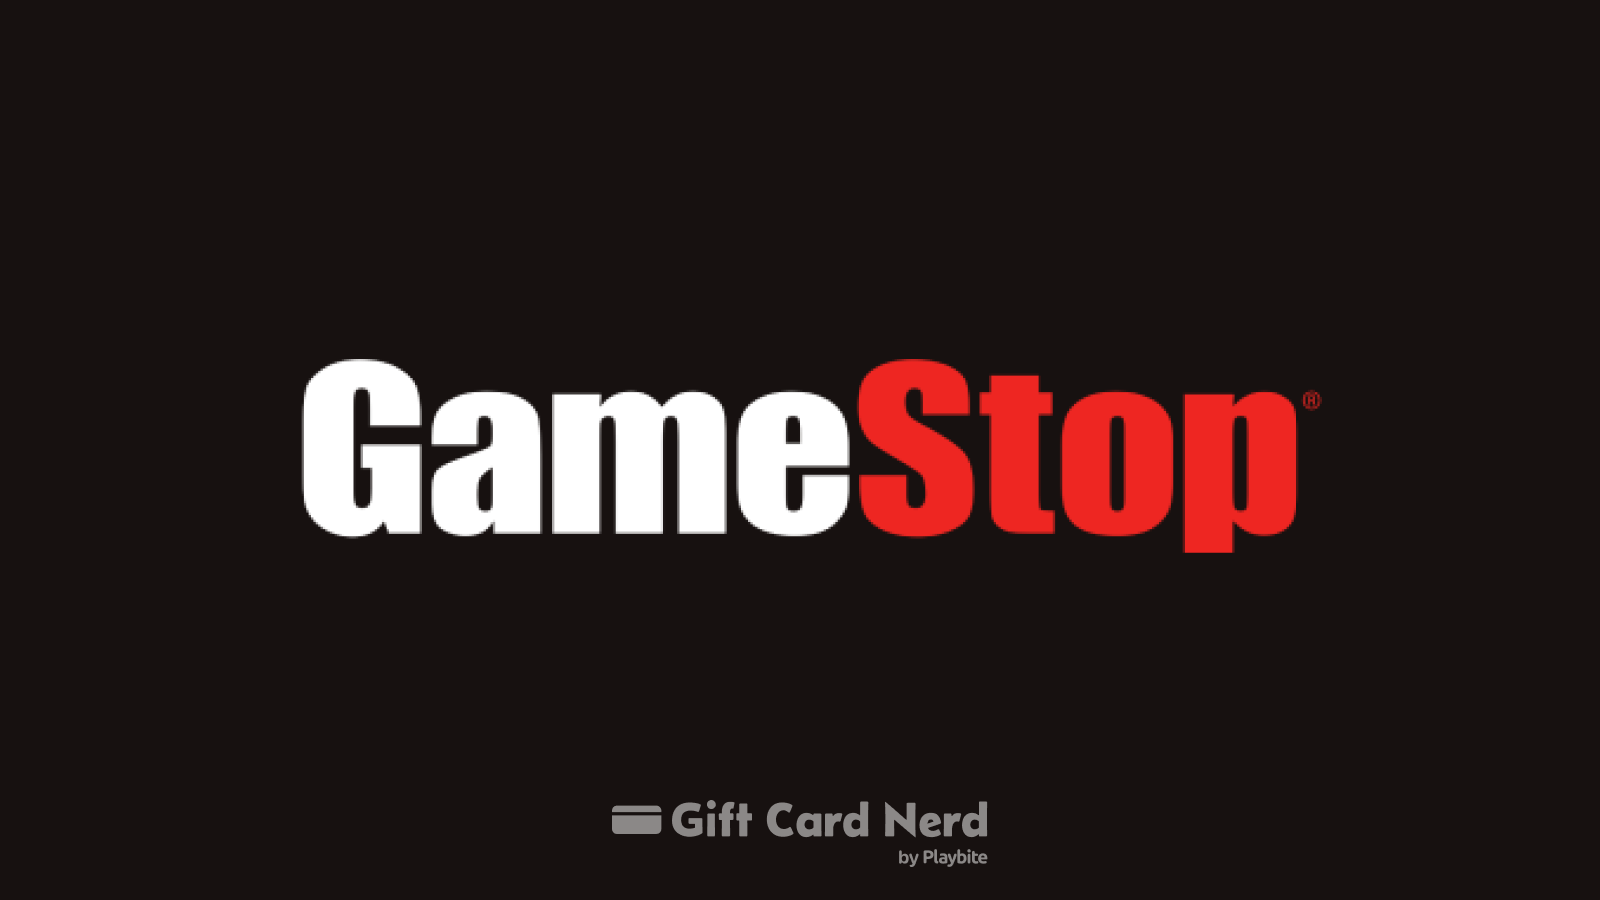 Can I Use a Game Stop Gift Card on Steam?